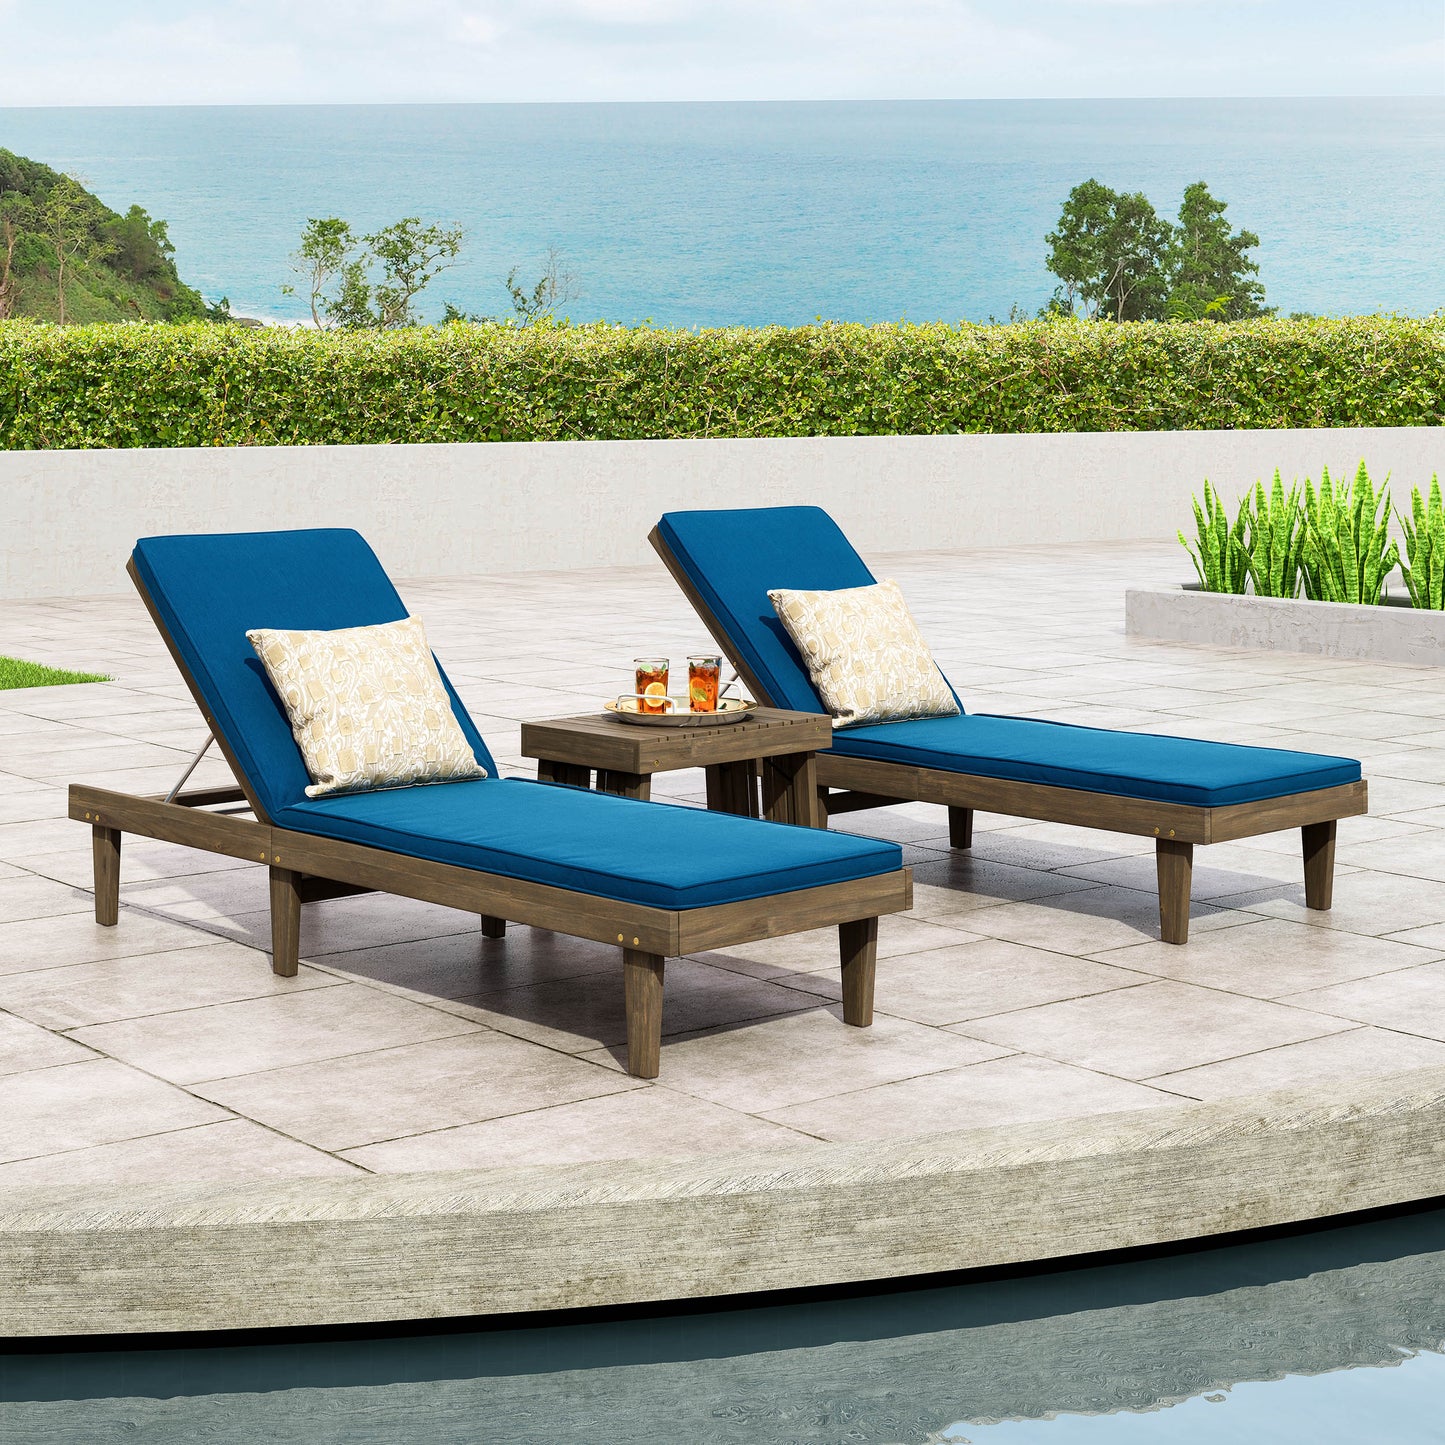 Addisyn Outdoor Acacia Wood 3 Piece Chaise Lounge Set with Water-Resistant Cushions